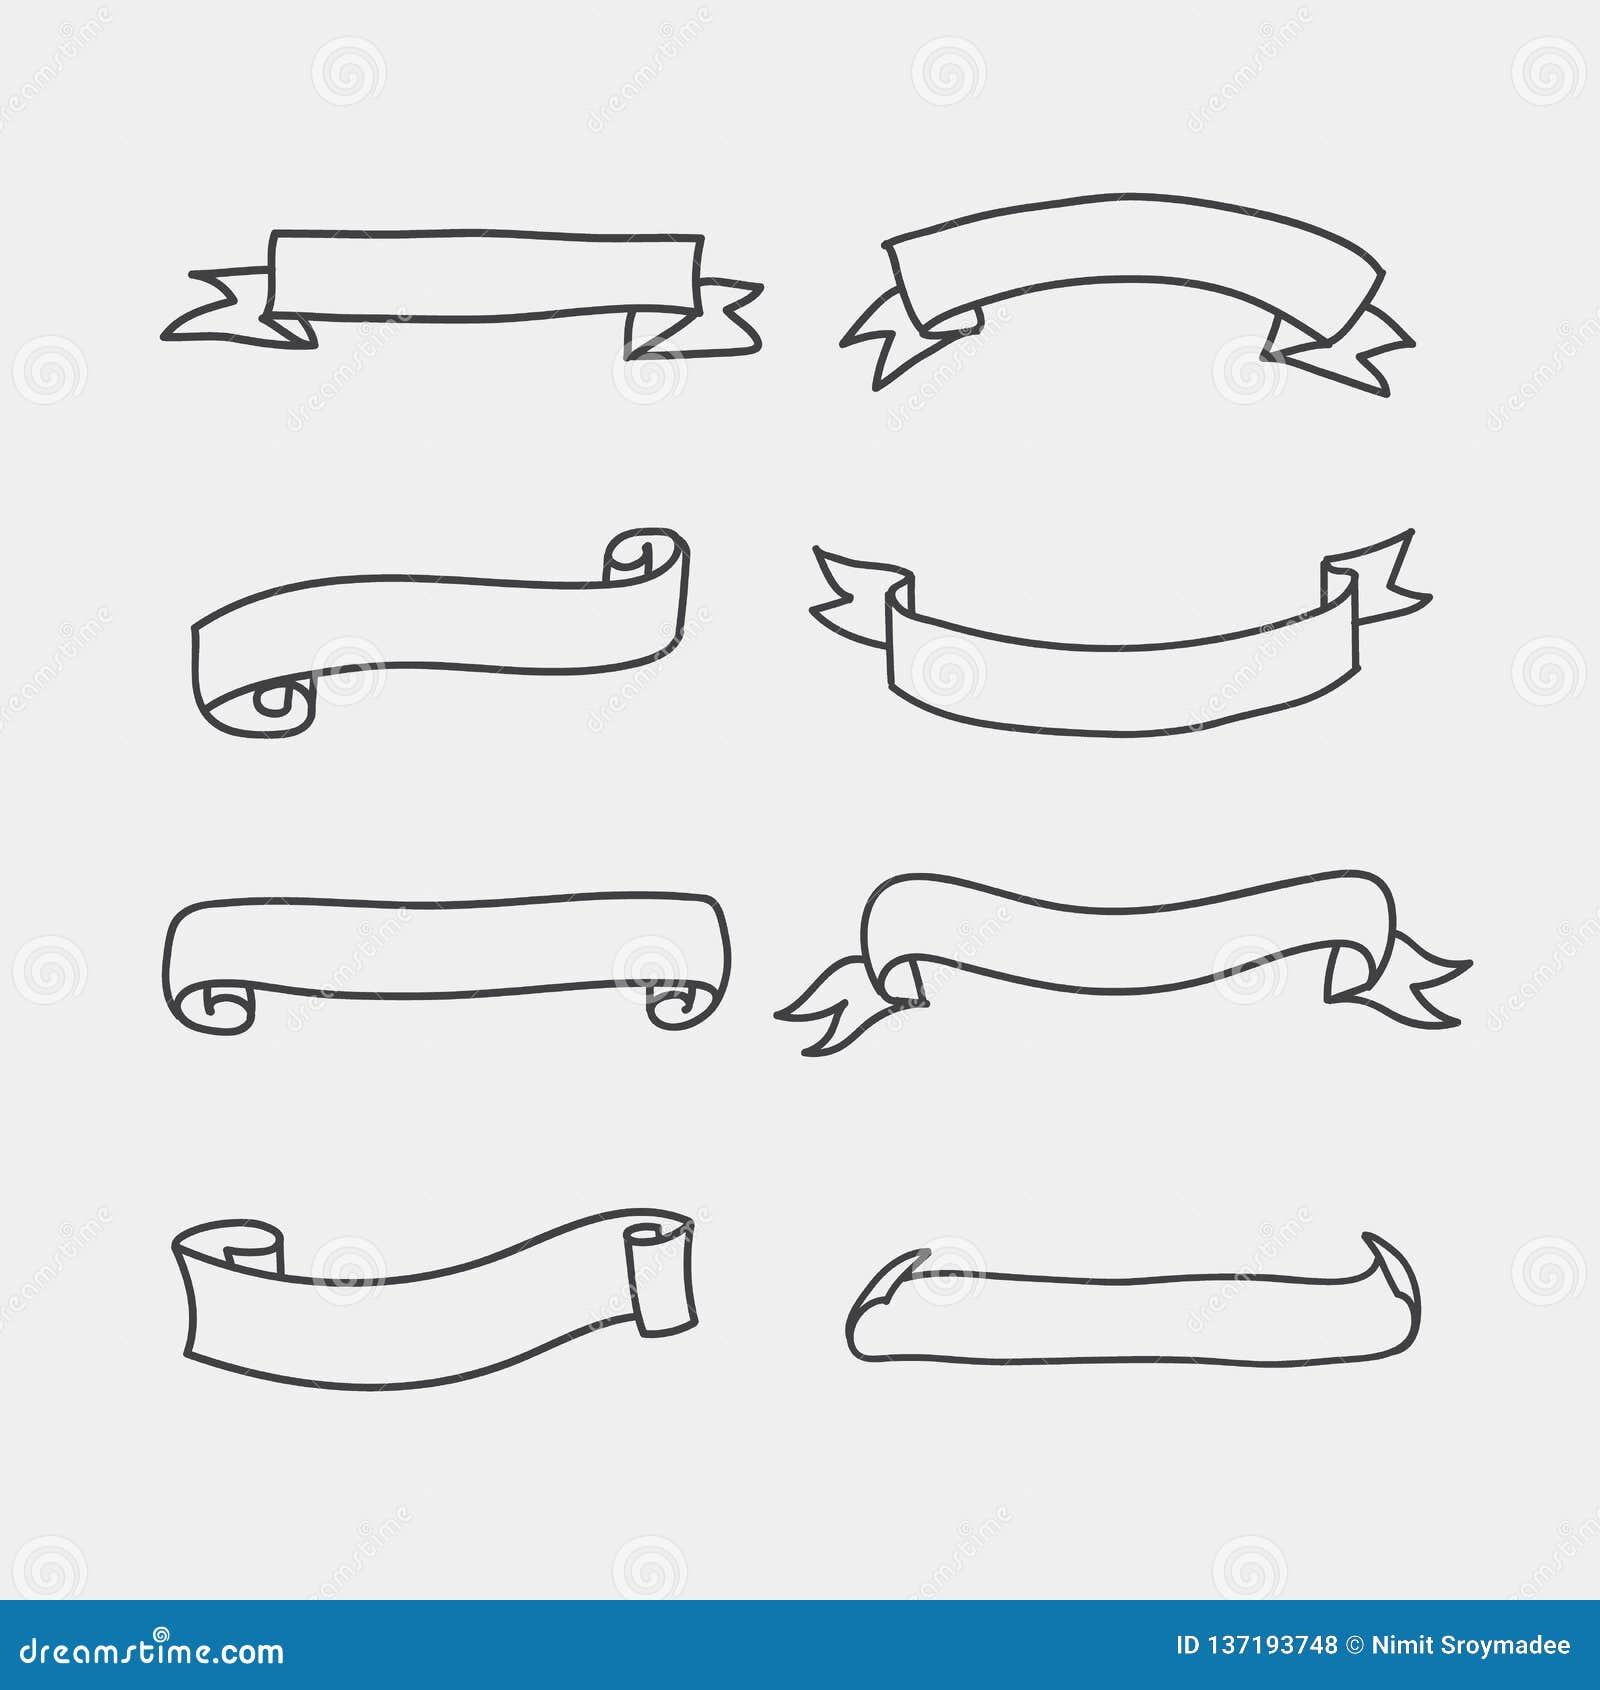 Cool Ribbon Banner Drawing Step By Step Creative Things